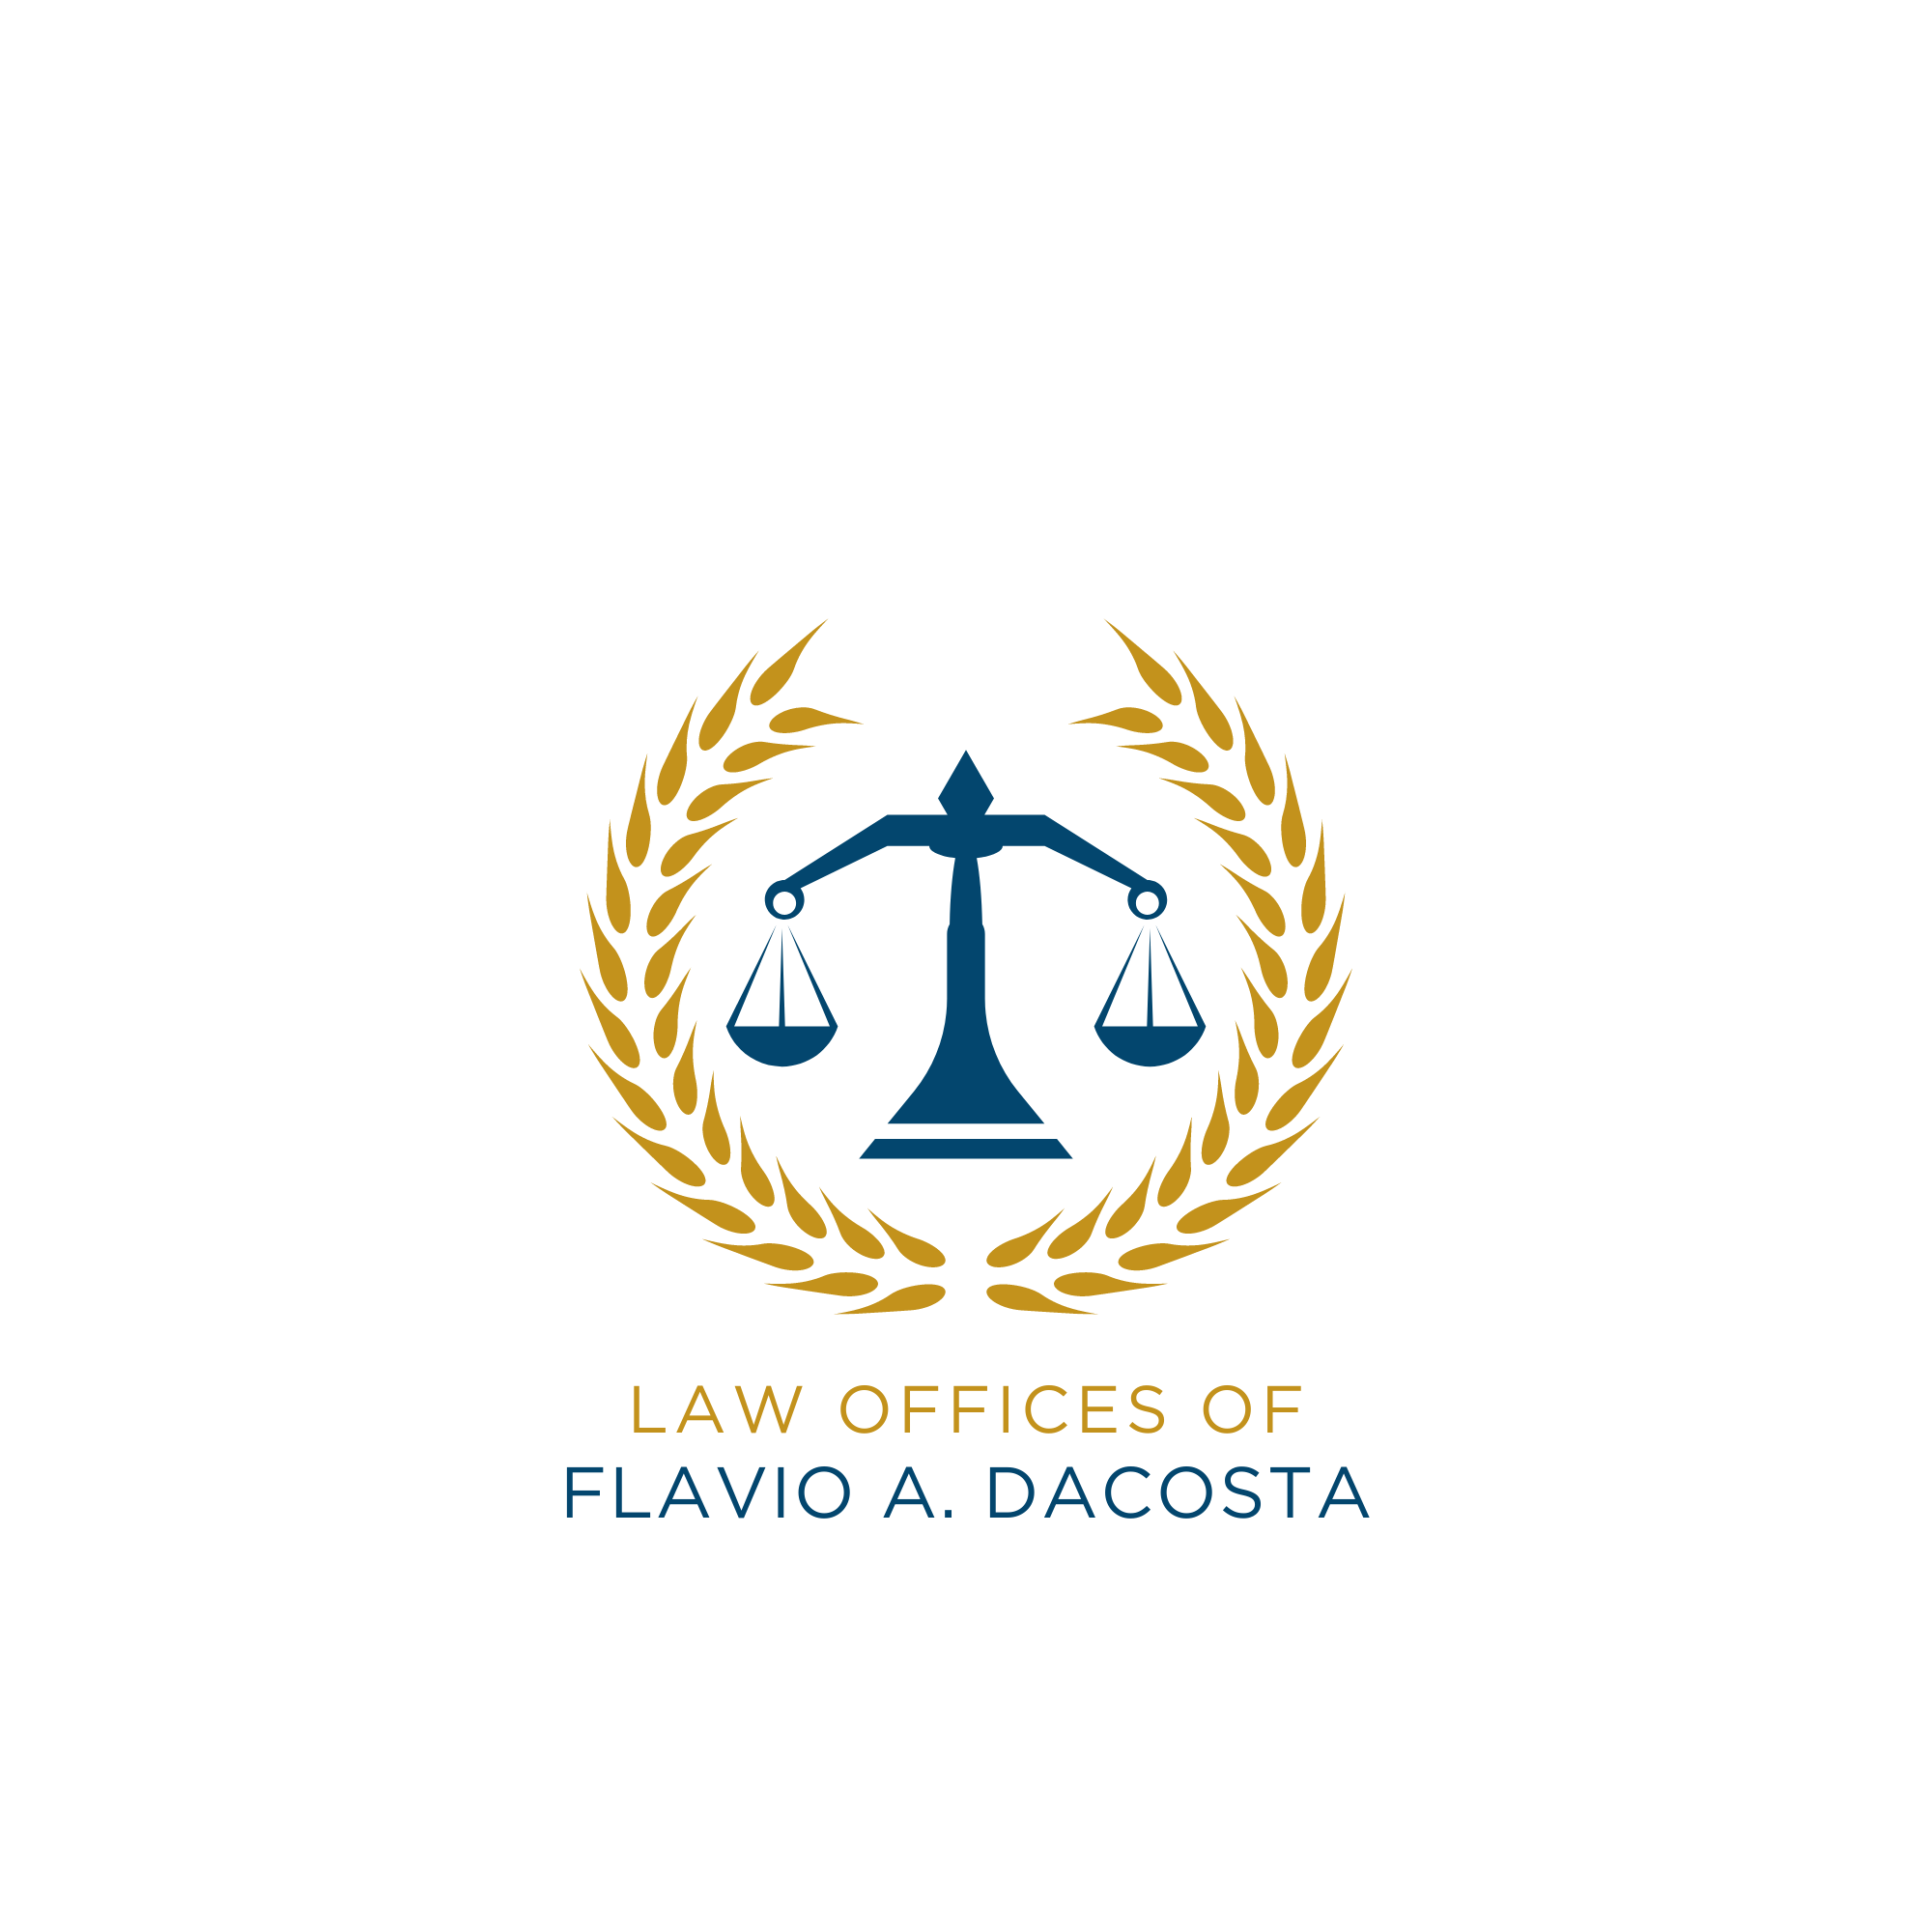 Law Offices of Flavio A. DaCosta